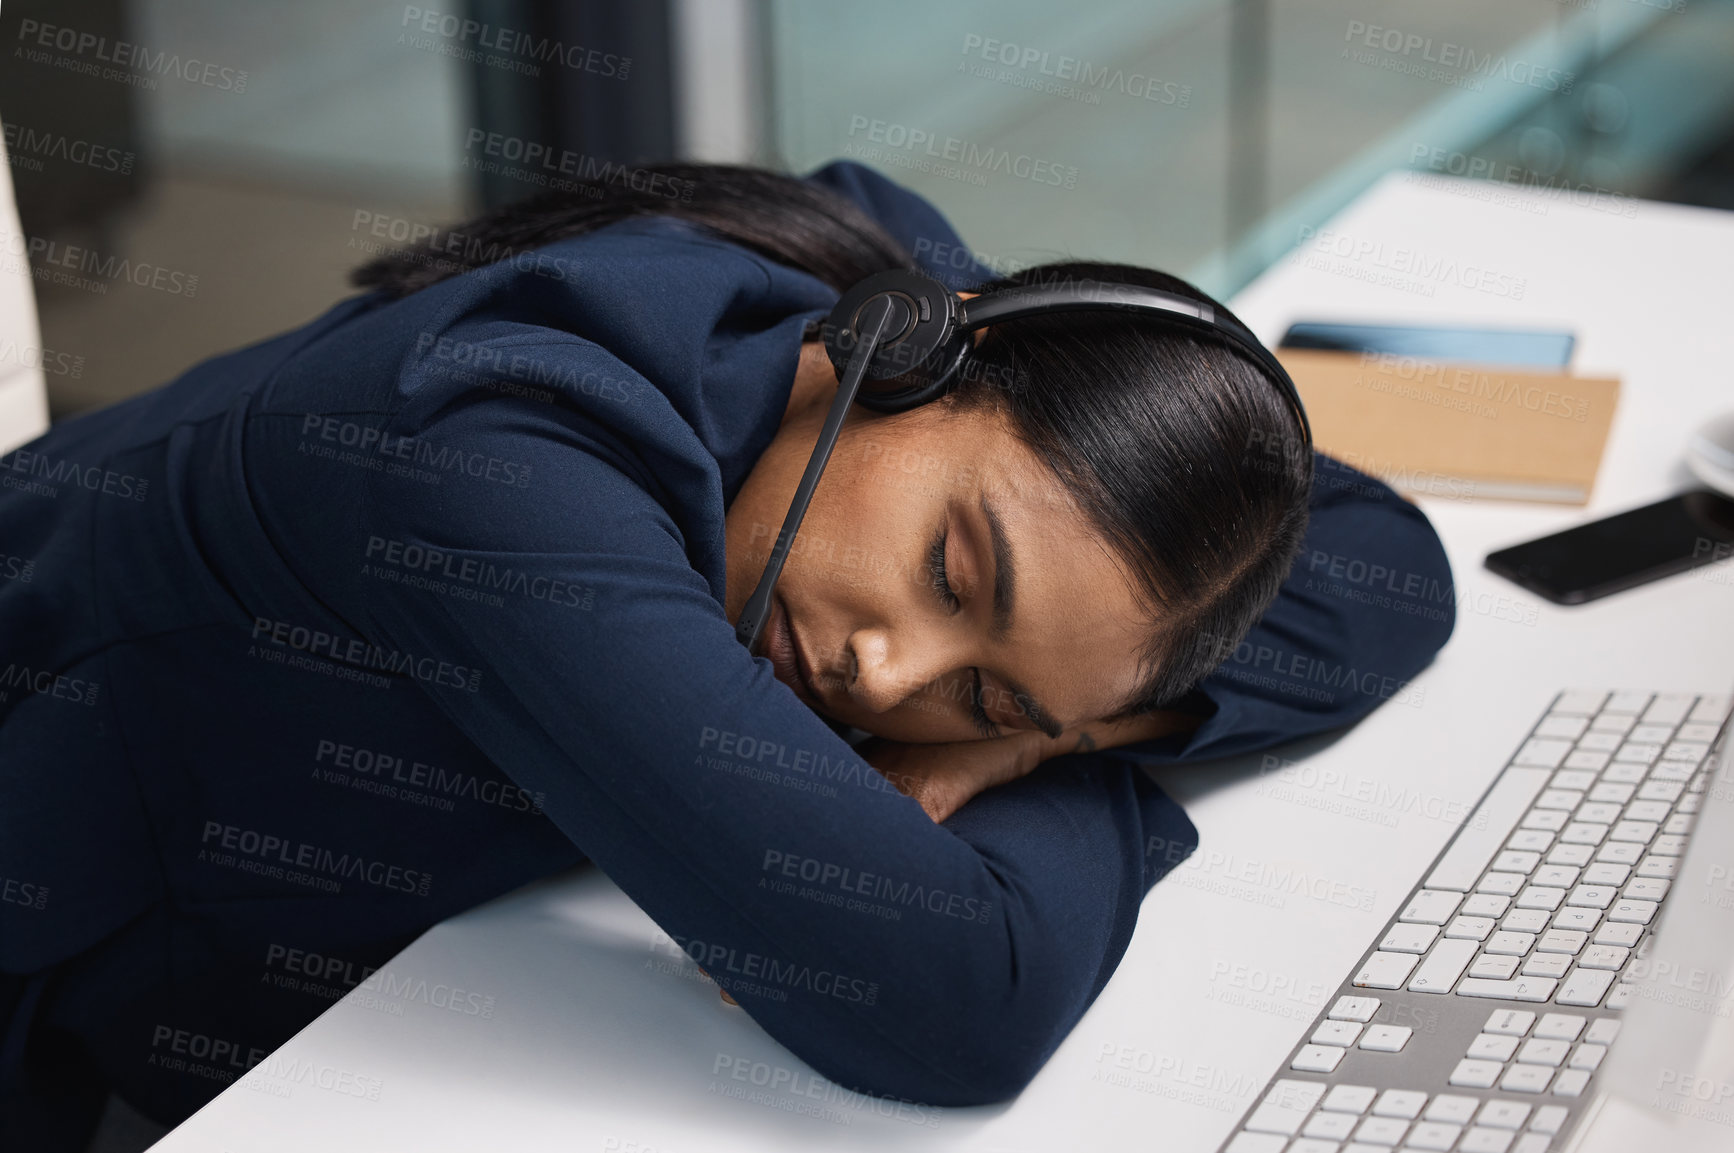 Buy stock photo Shot of a young businesswoman sleeping at her desk in a call centre